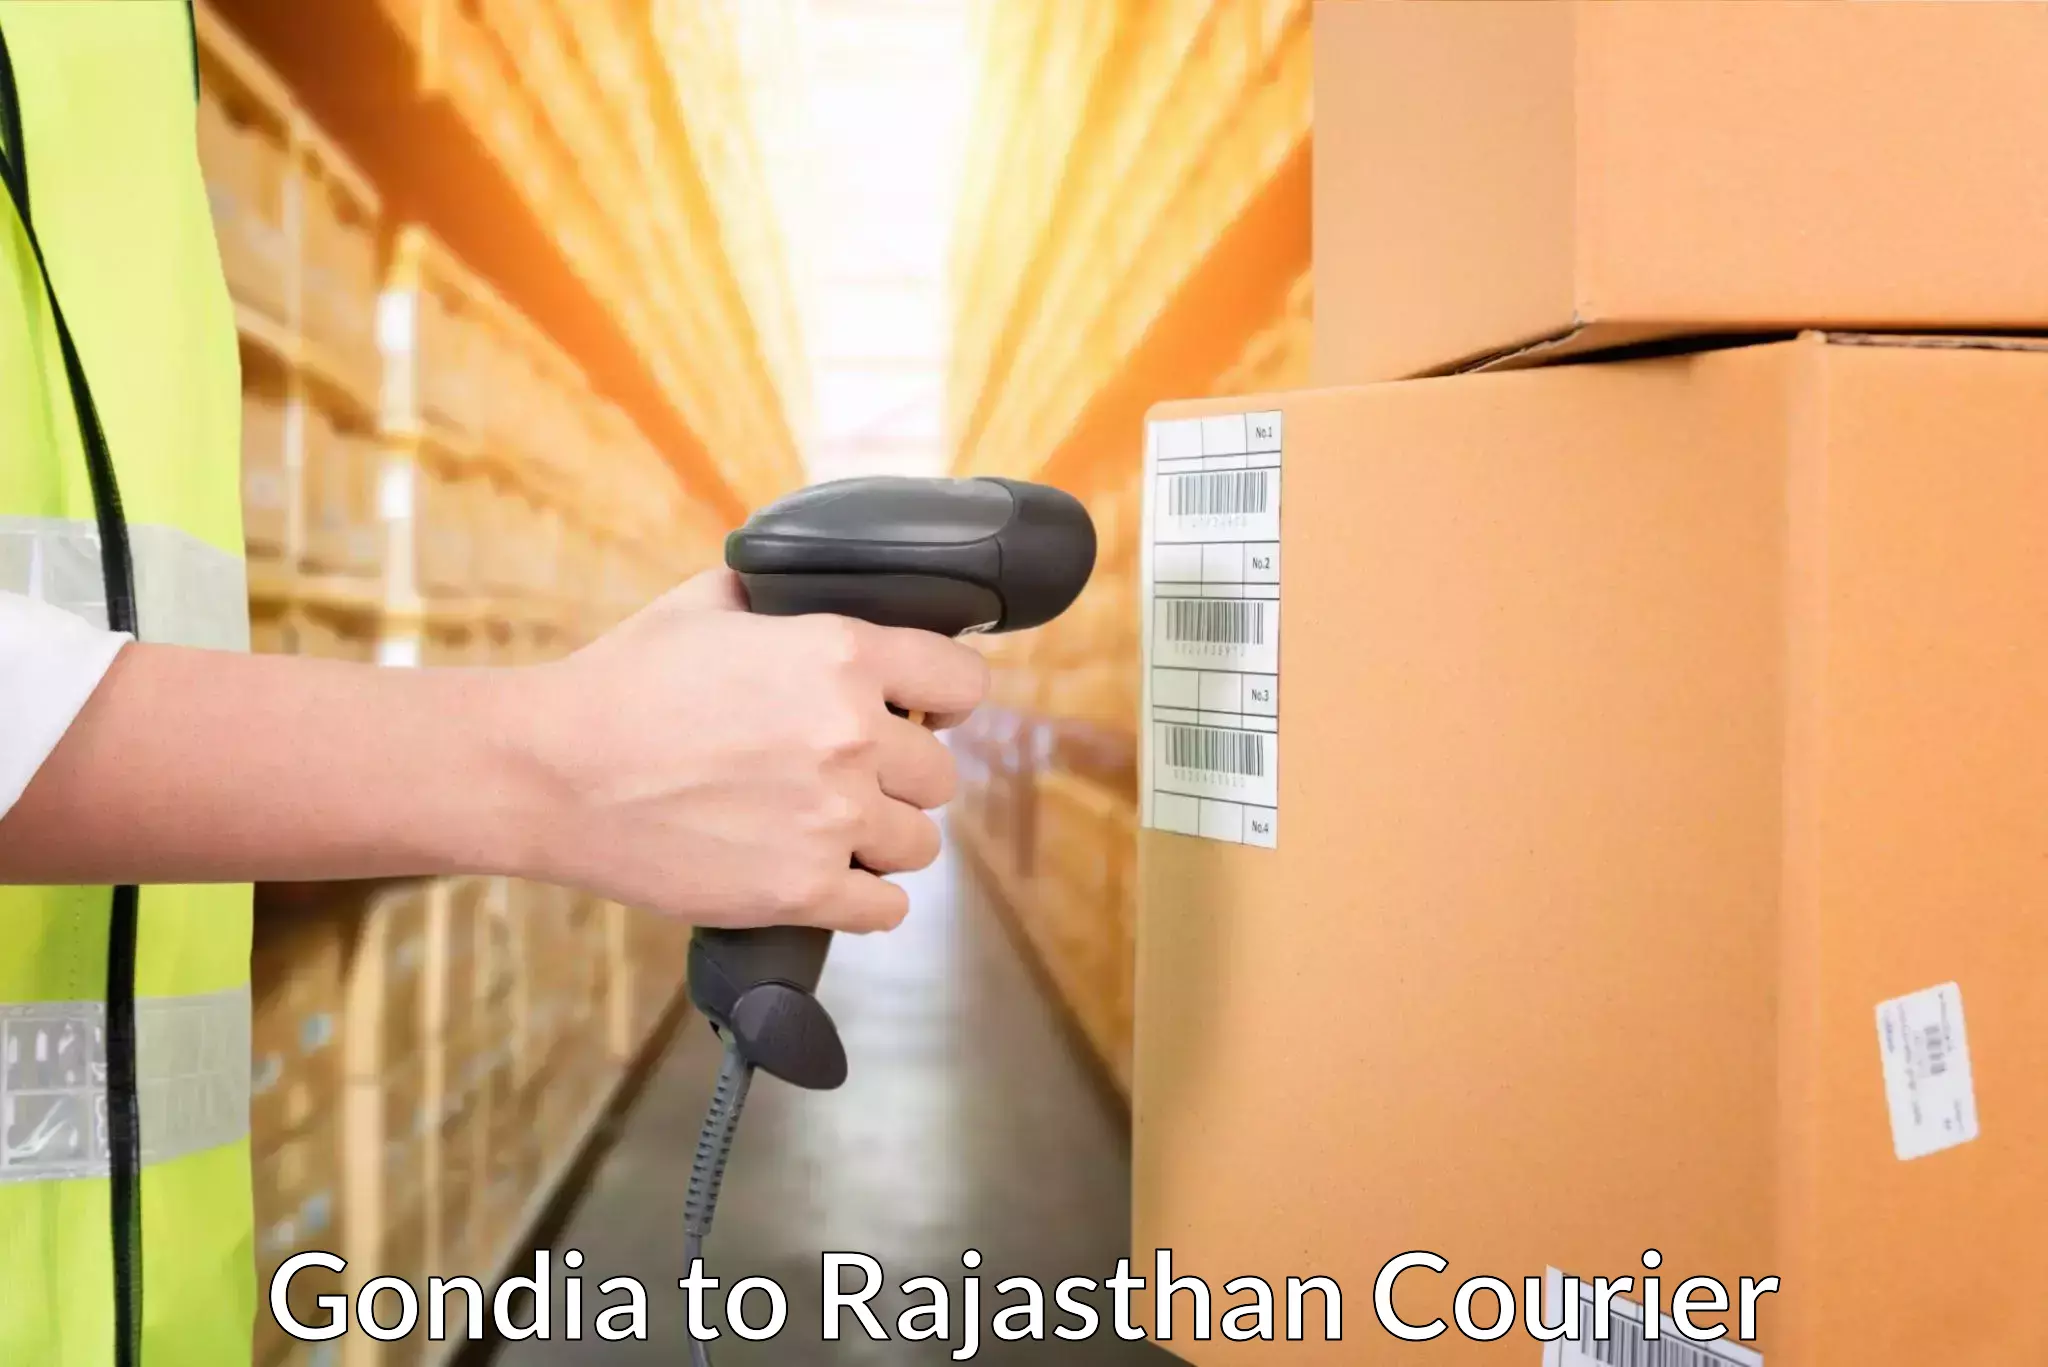 Parcel handling and care Gondia to Udaipur